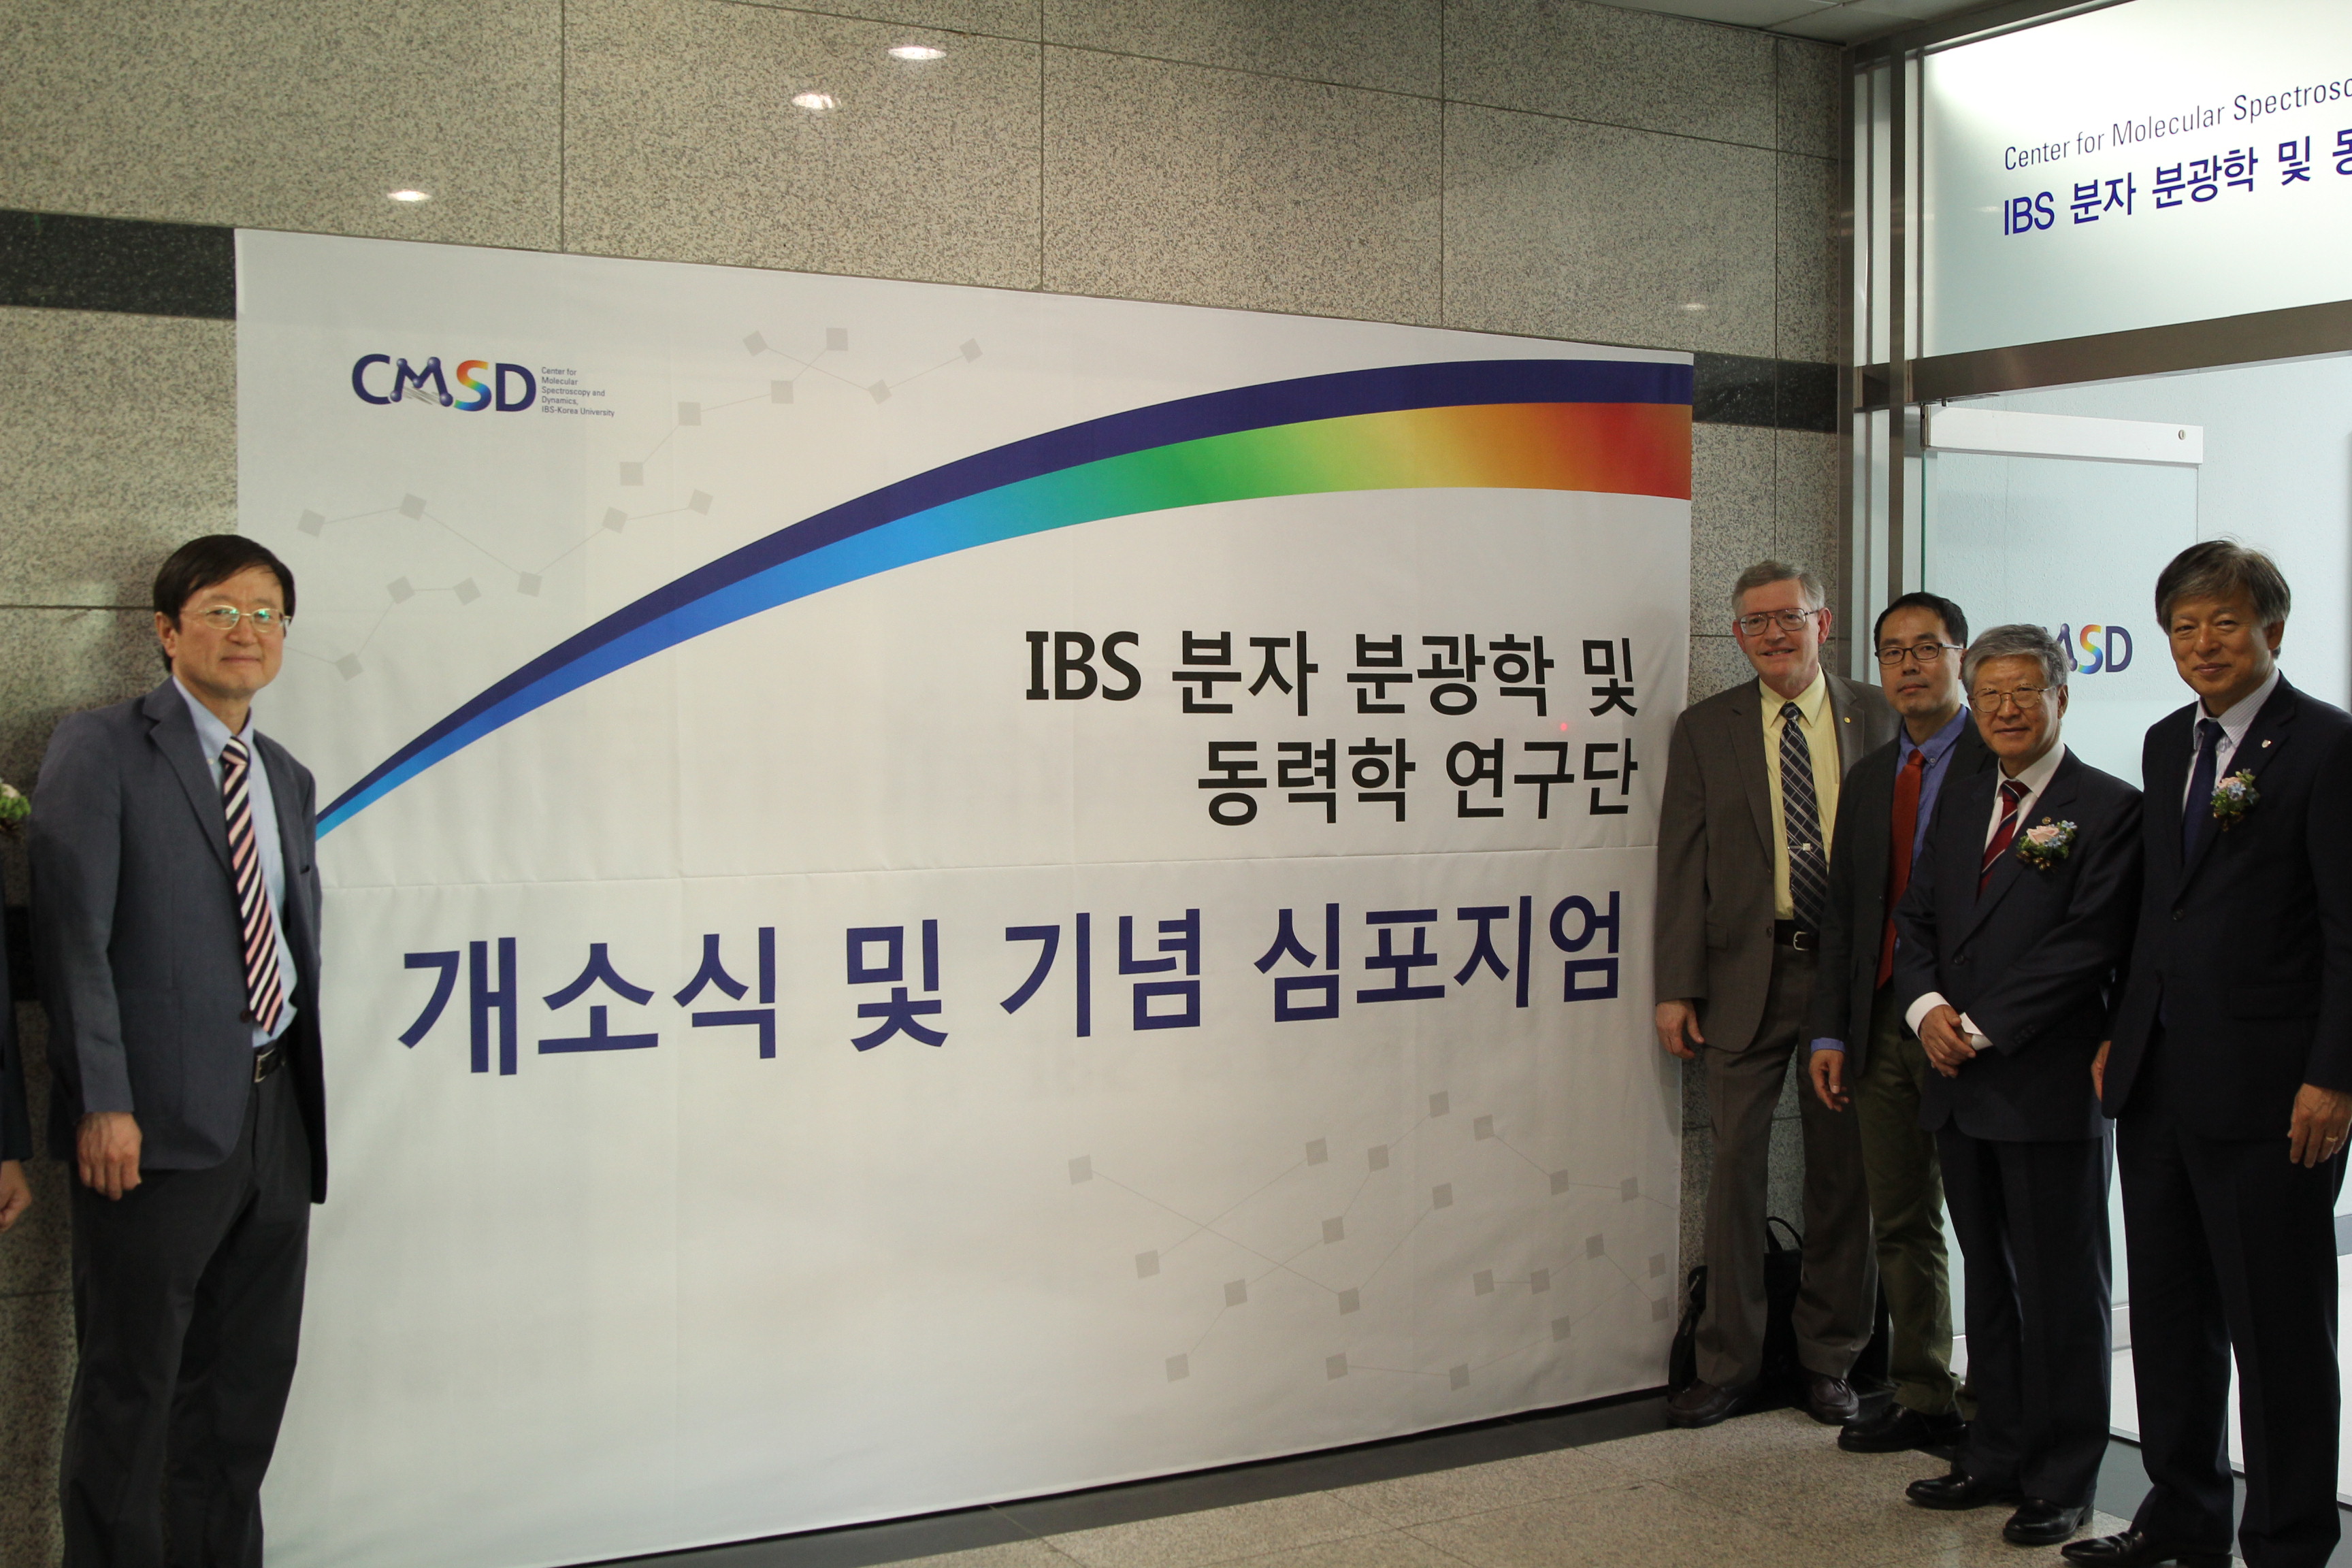 Opening of IBS Center for Molecular Spectroscopy and Dynamics at Korea University